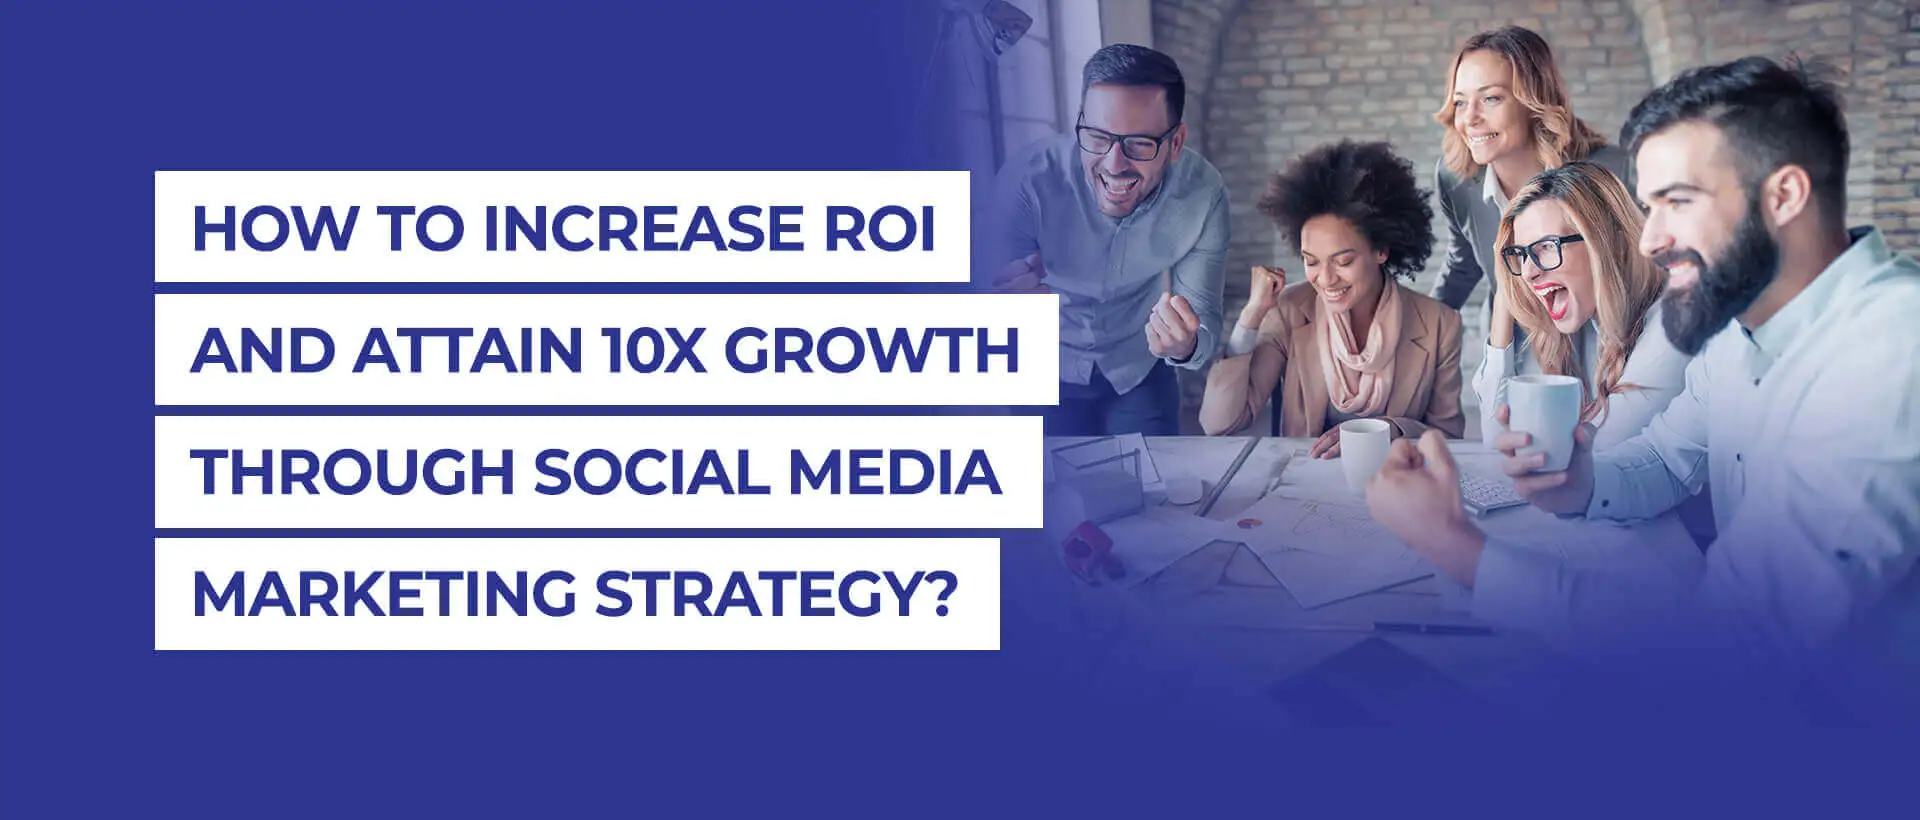 How to Increase ROI and Attain 10X Growth Through Social Media Marketing Strategy?